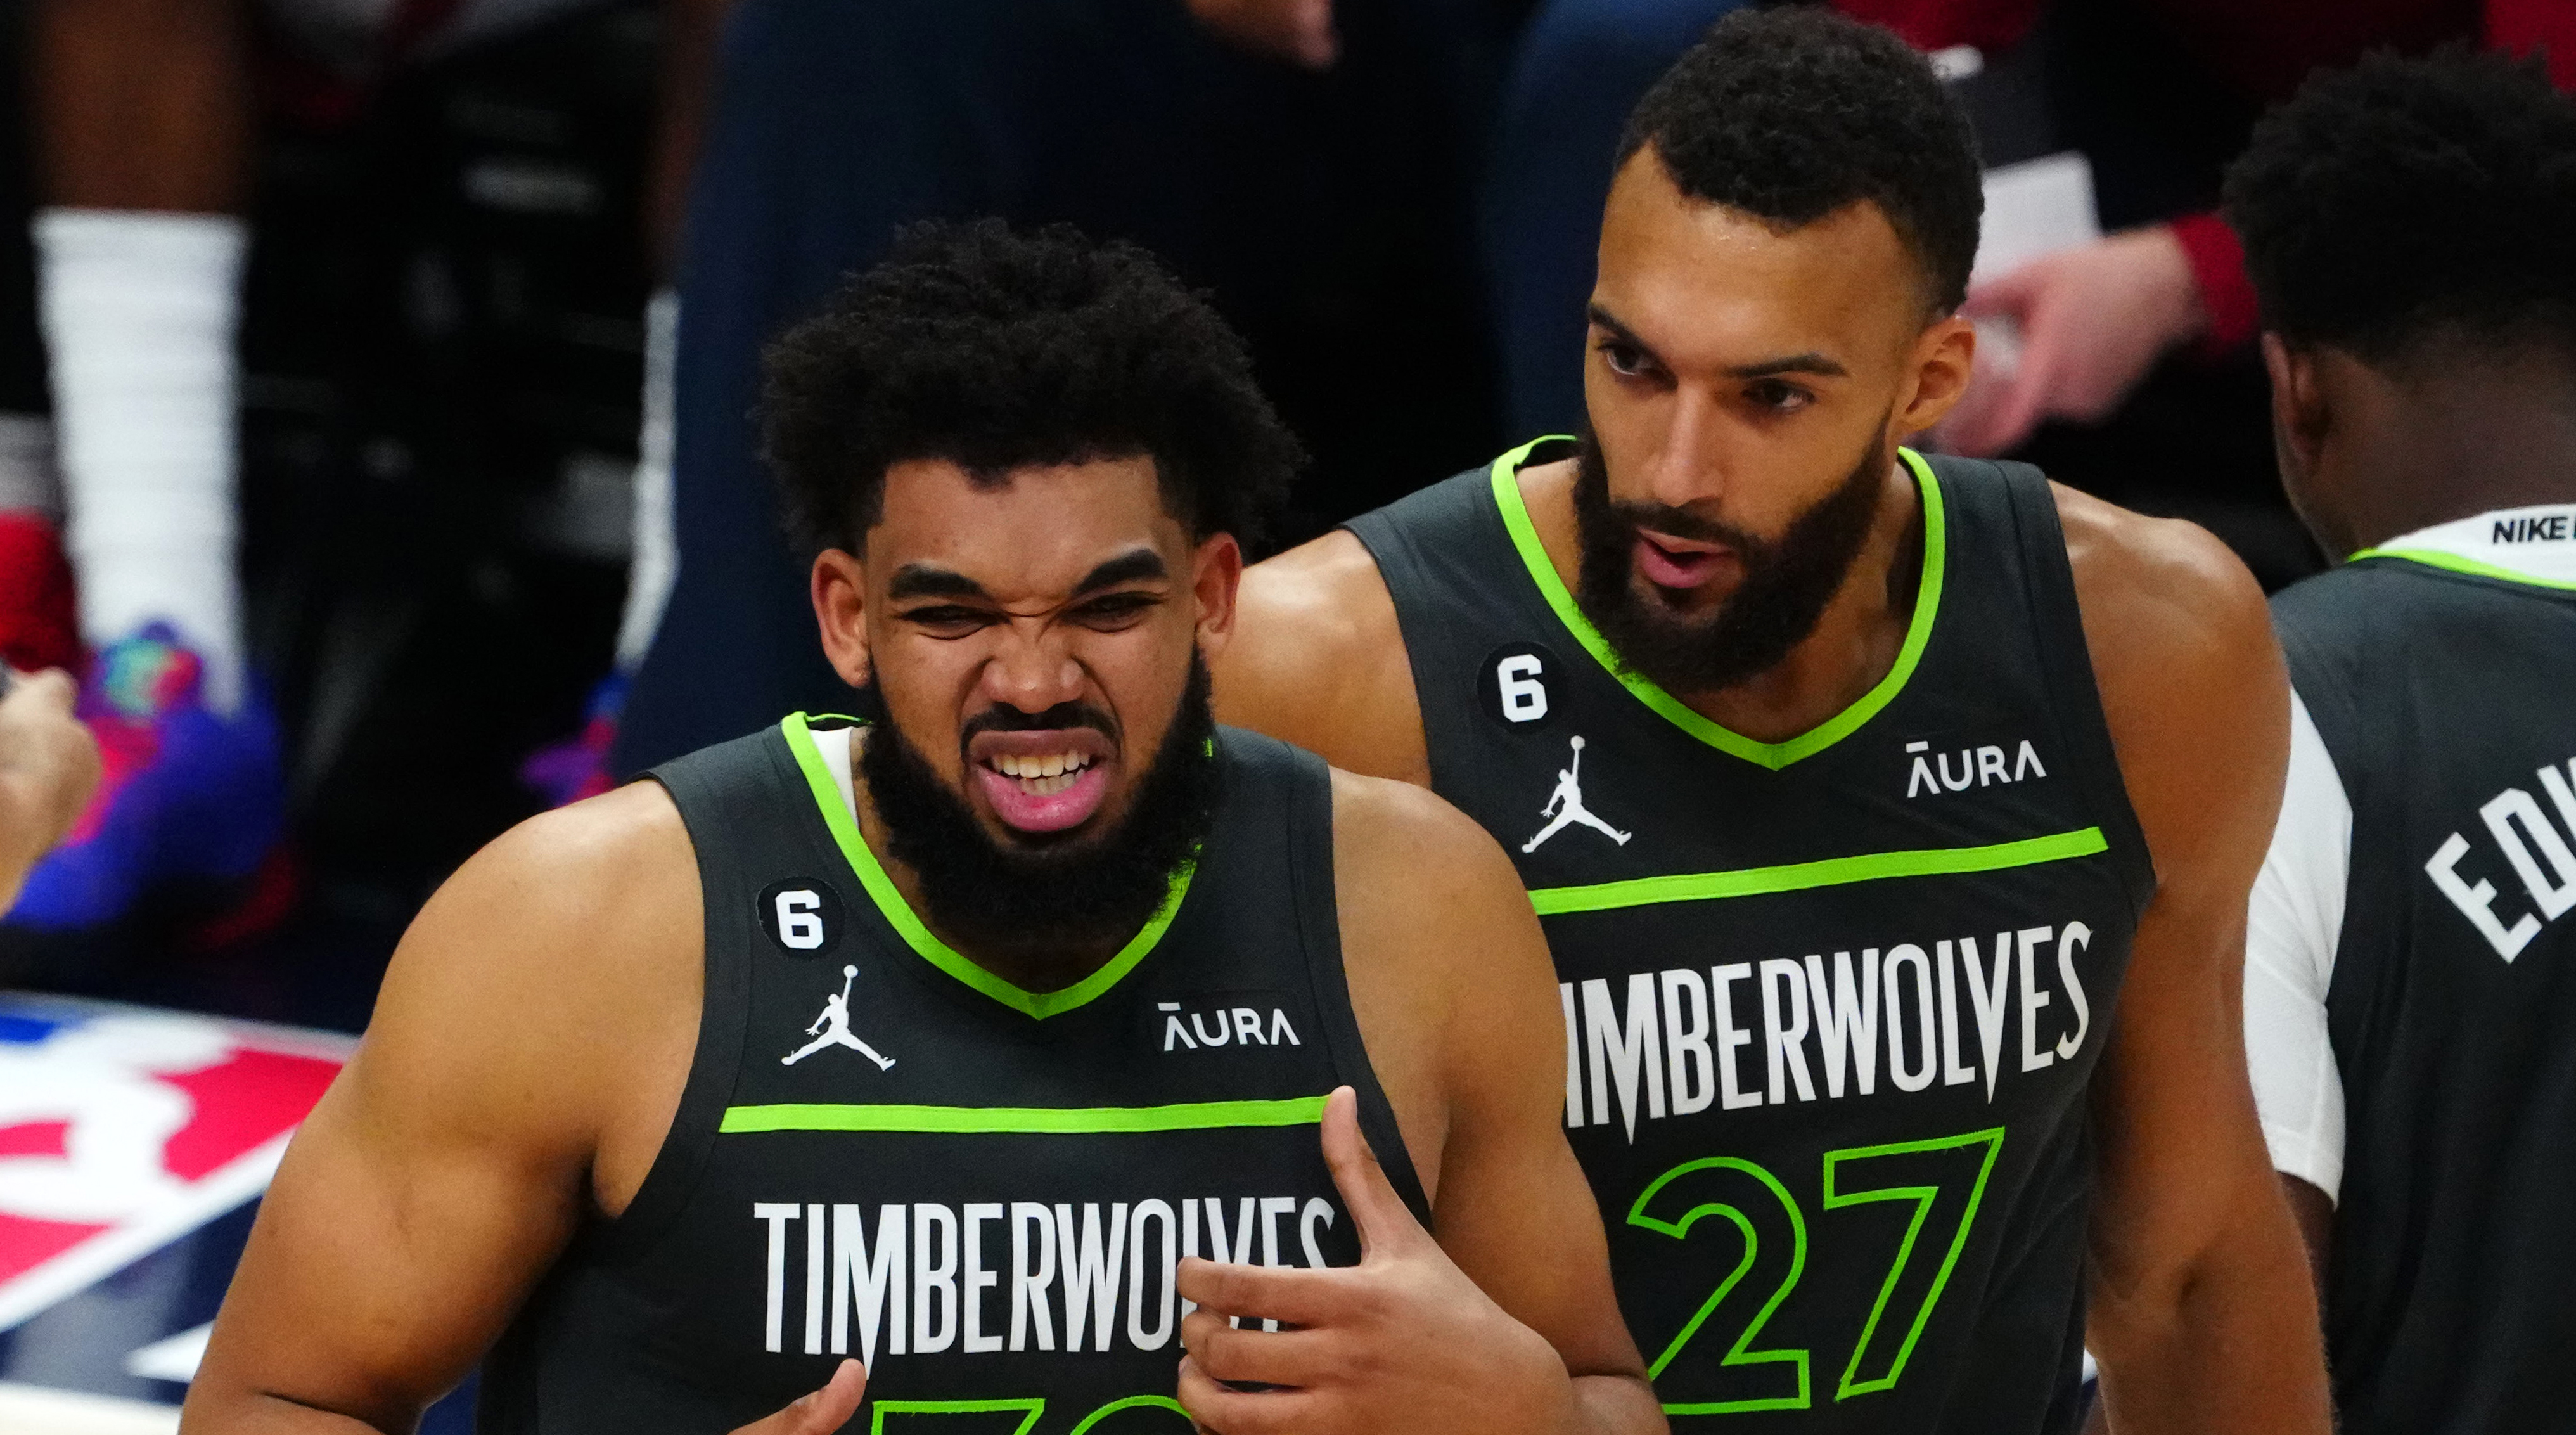 Minnesota Timberwolves Karl-Anthony Towns is the face of the NBA's